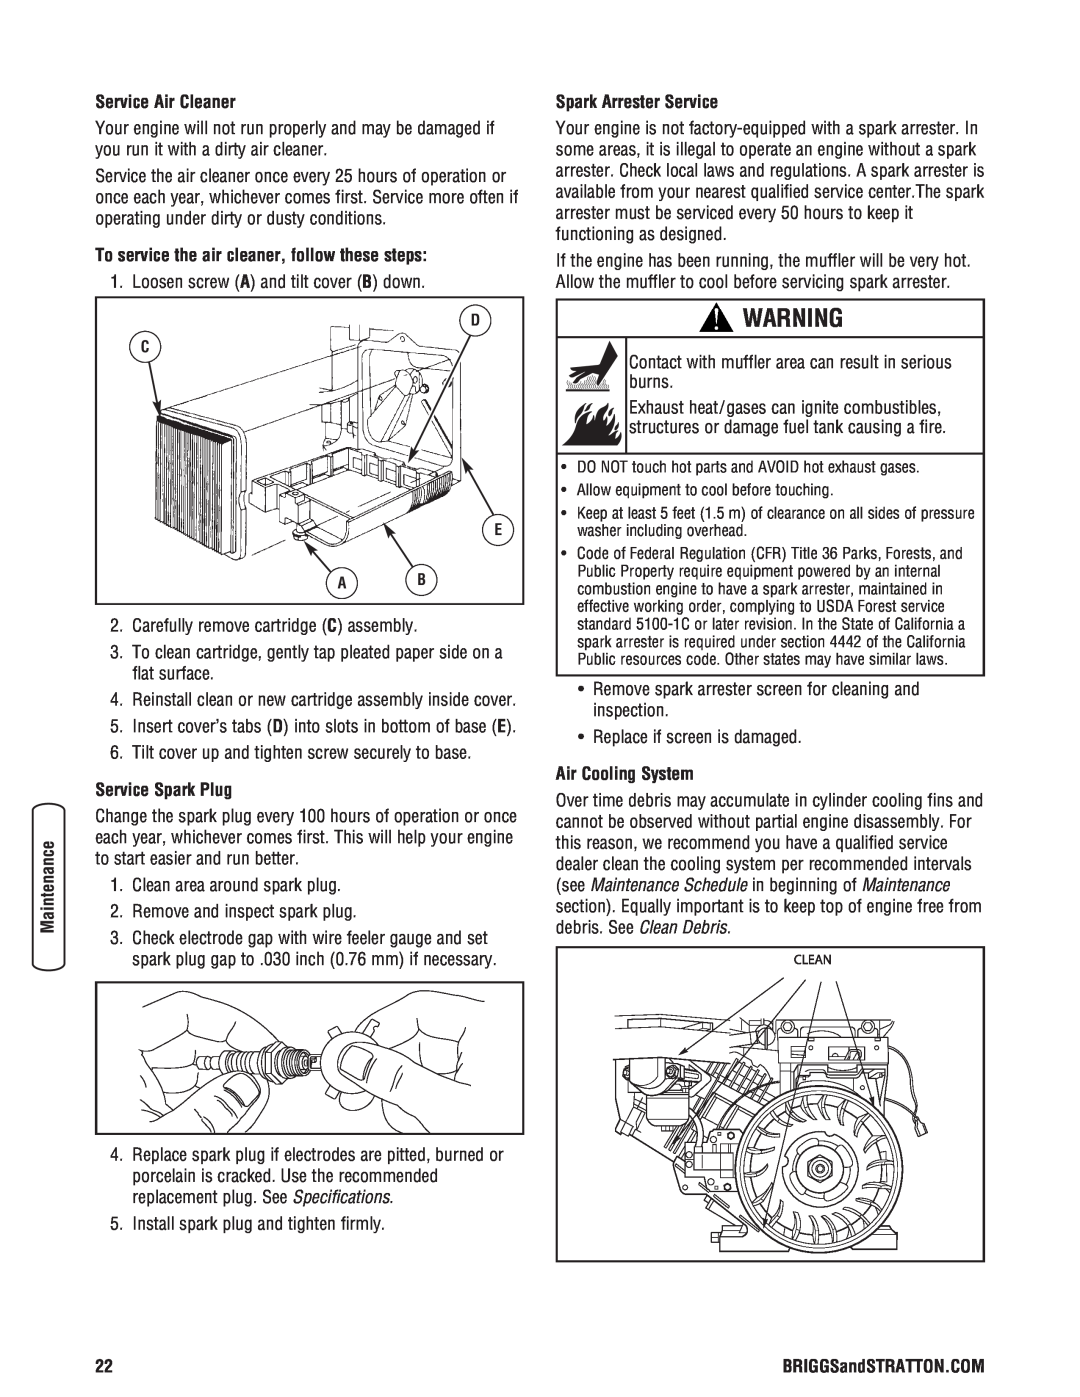 Briggs & Stratton 020364-0 manual Service Air Cleaner, To service the air cleaner, follow these steps, Service Spark Plug 